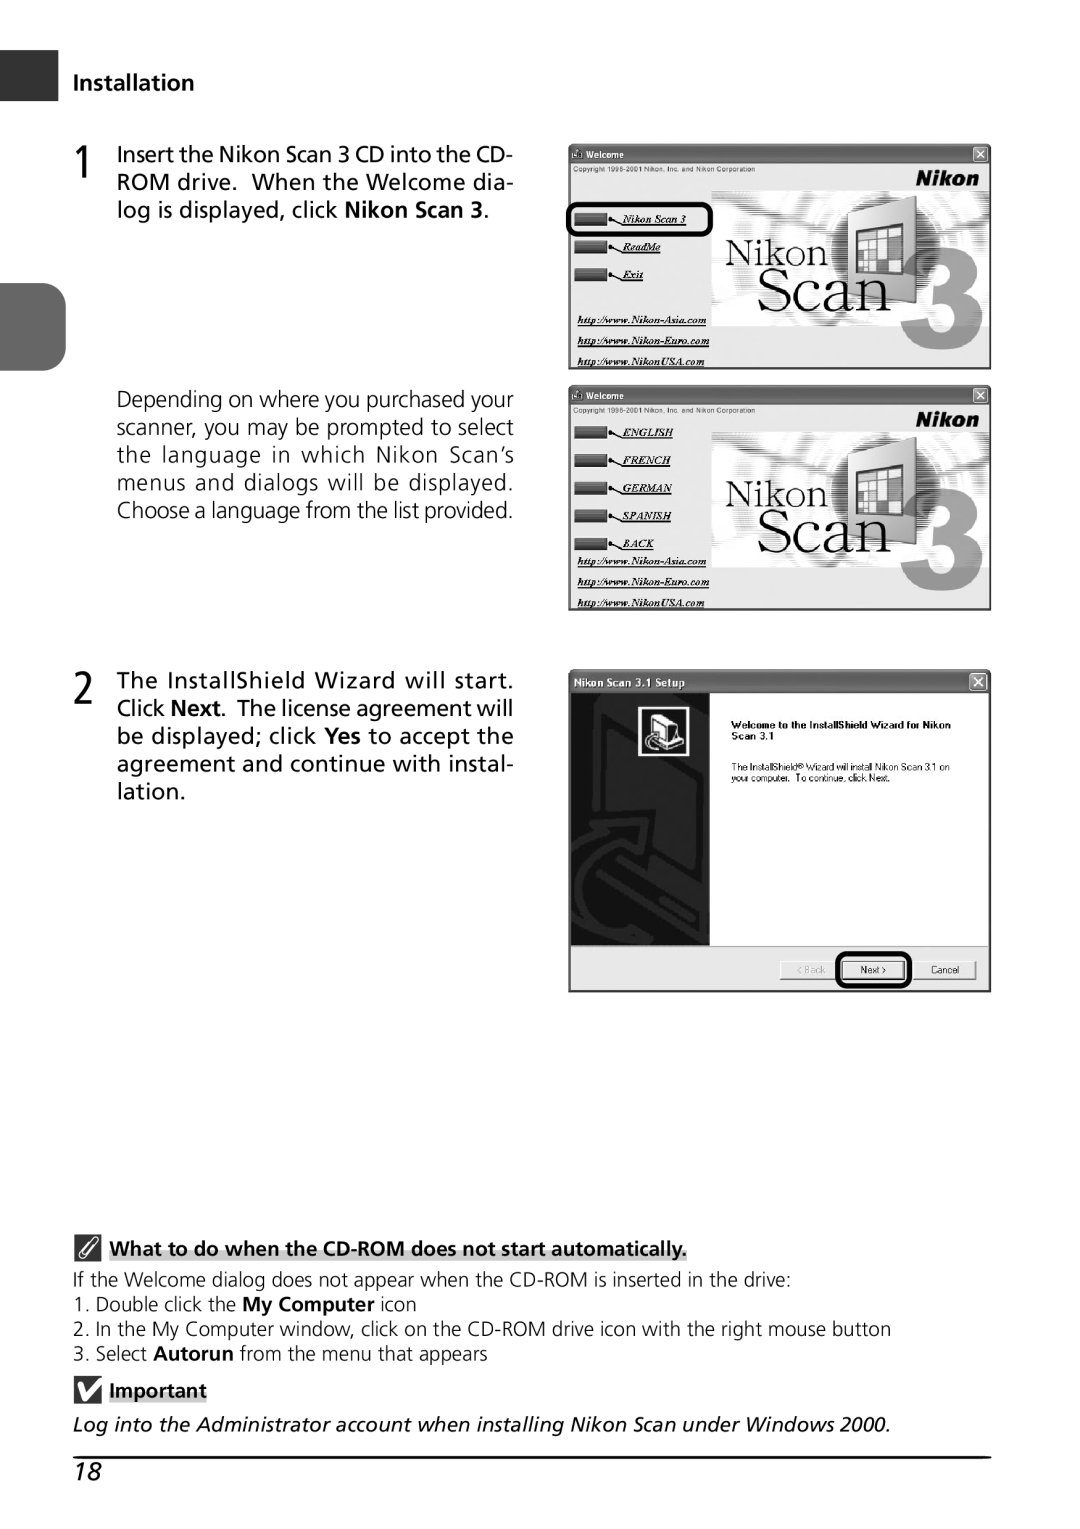 Nikon LS8000 user manual Installation, ROM drive. When the Welcome dia, log is displayed, click Nikon Scan 